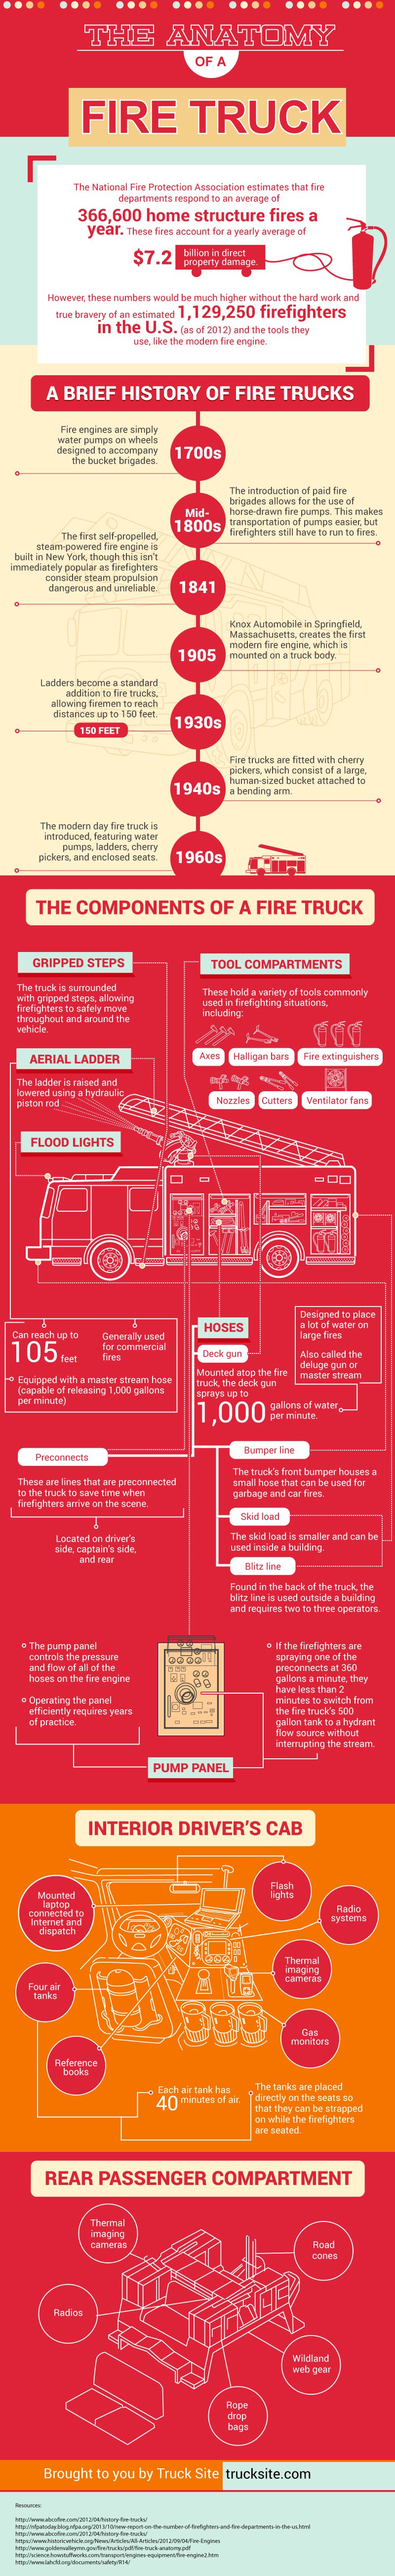 The Anatomy of A Fire Truck